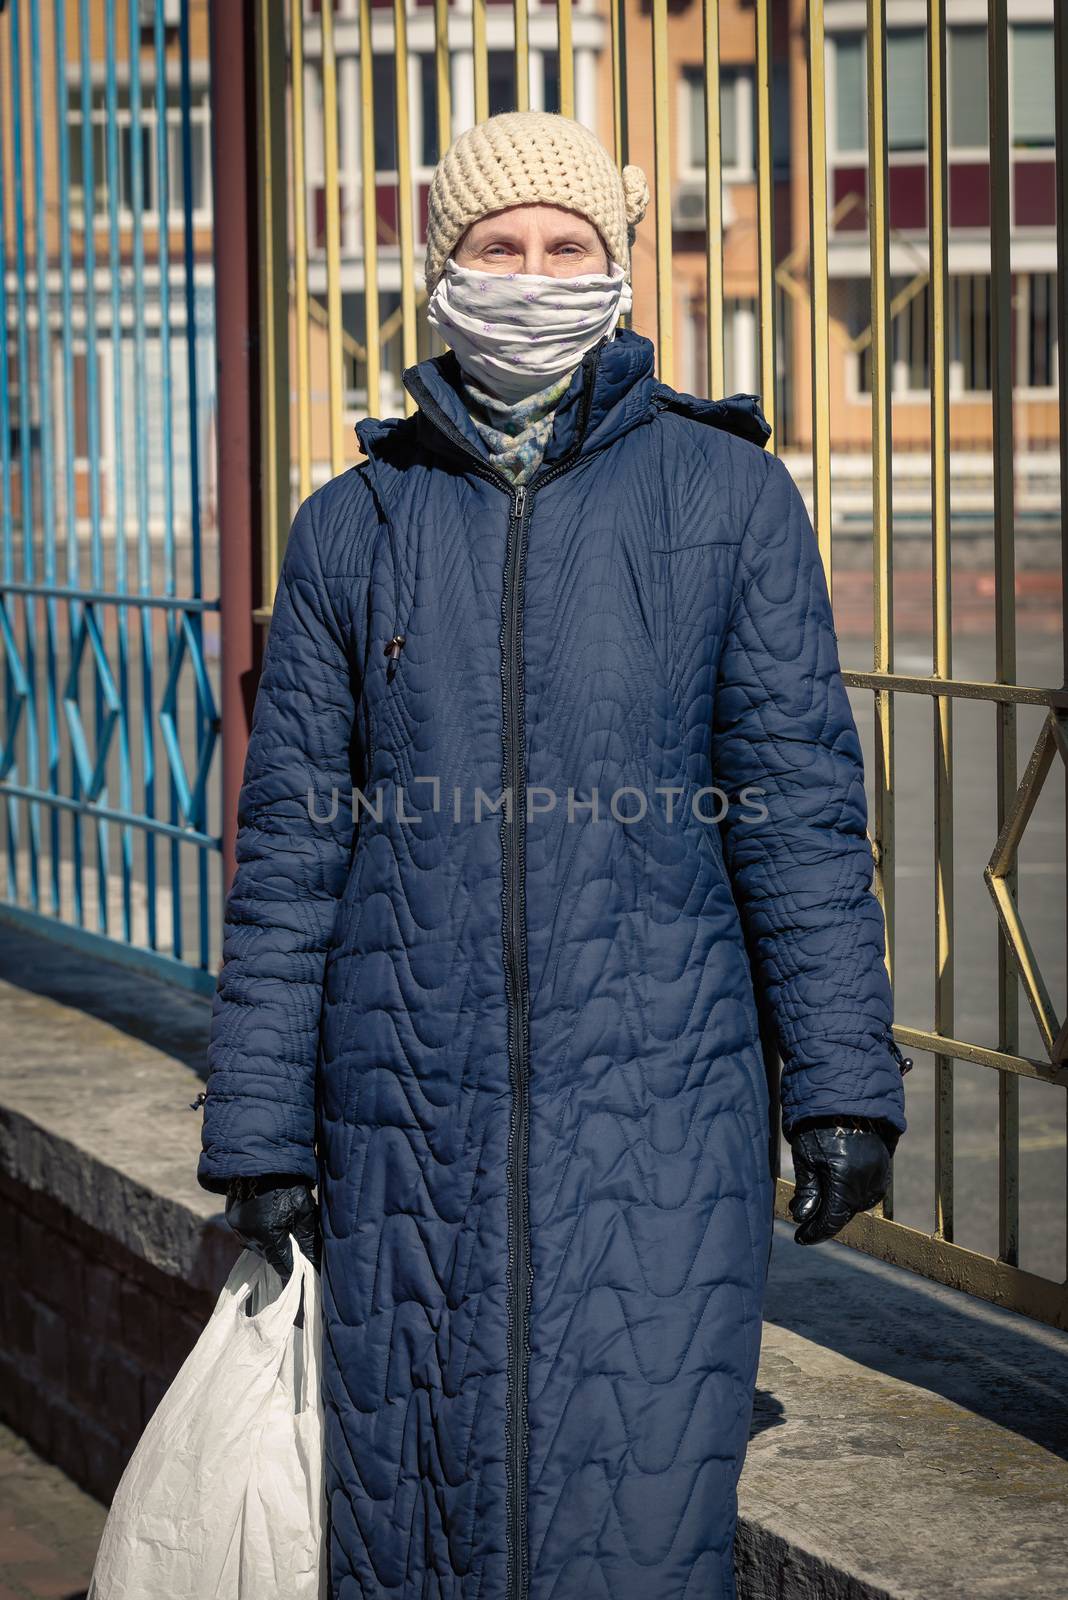 A poor elderly woman wears a homemade mask to protect herself from viruses such as coronavirus, also known as covid-19, or SARS and MERS. She's in an urban environment